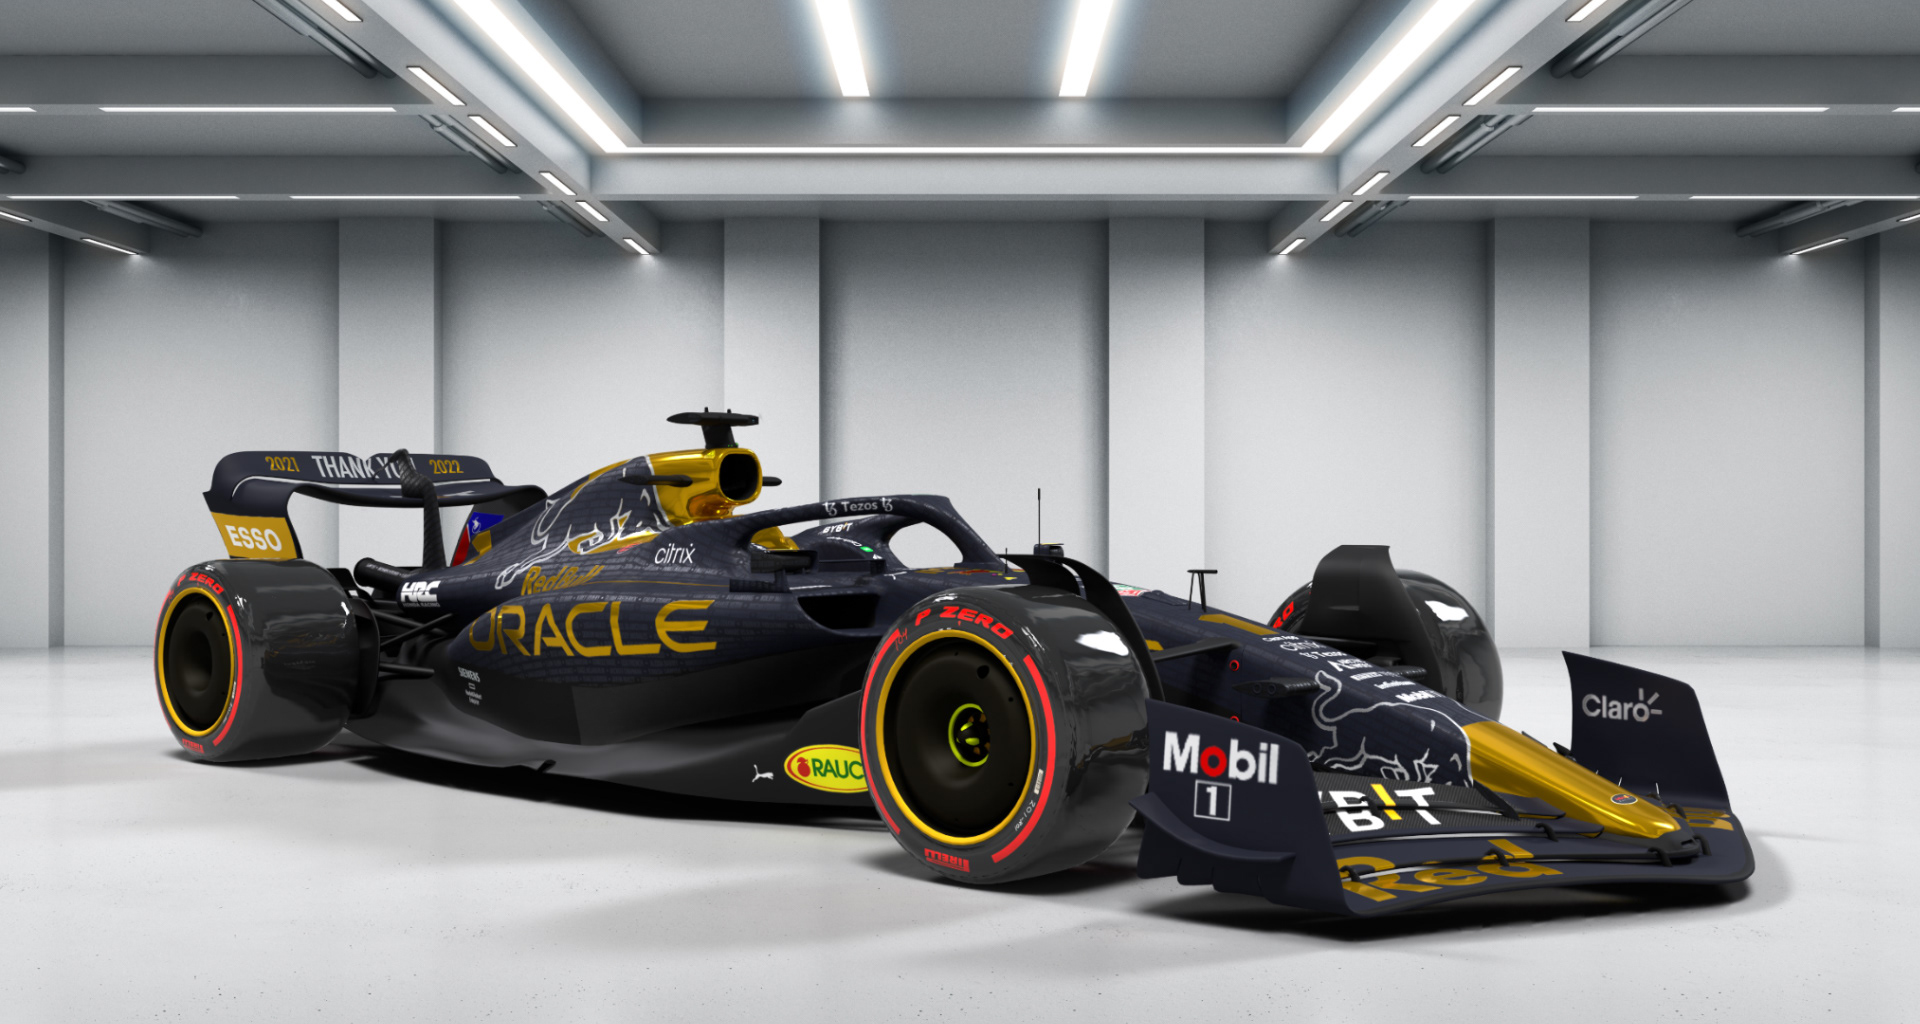 James Kashetta - Red Racing - Champion Livery Concept